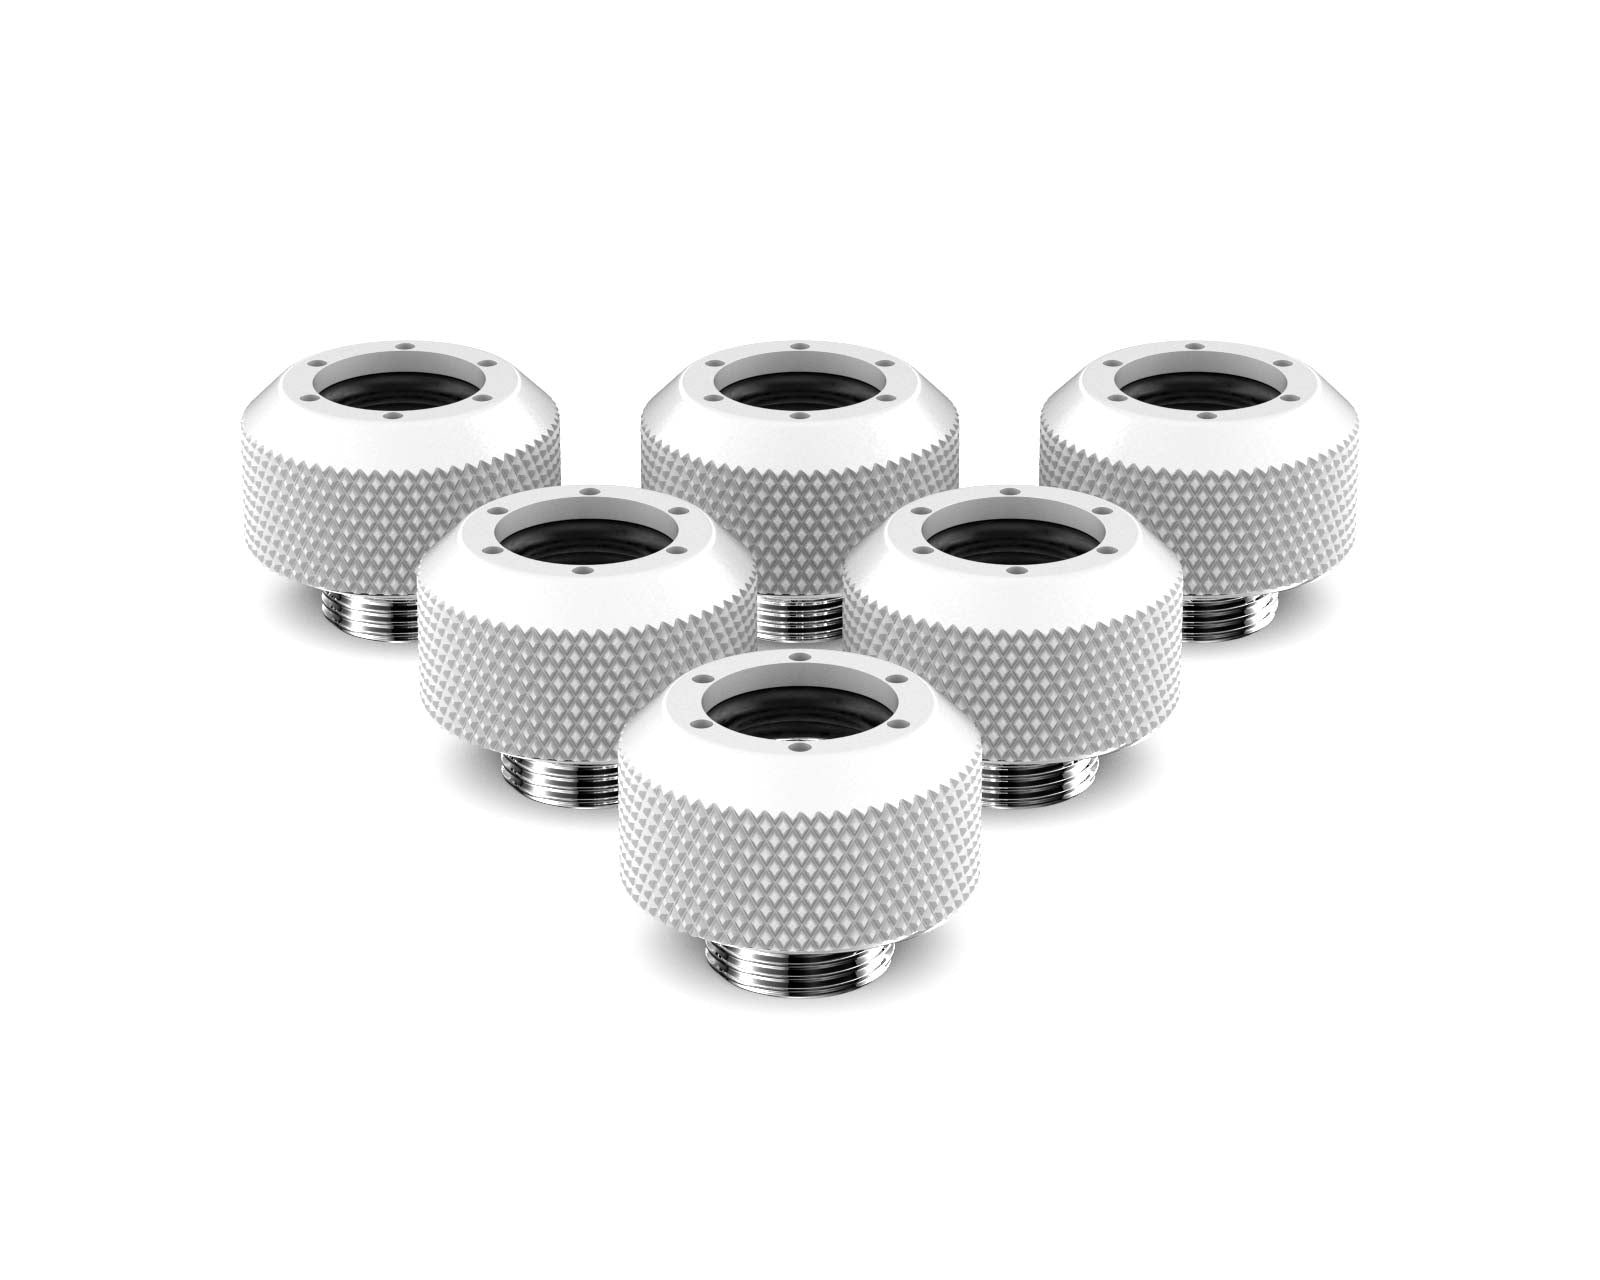 PrimoChill 1/2in. Rigid RevolverSX Series Fitting - 6 pack - PrimoChill - KEEPING IT COOL Sky White